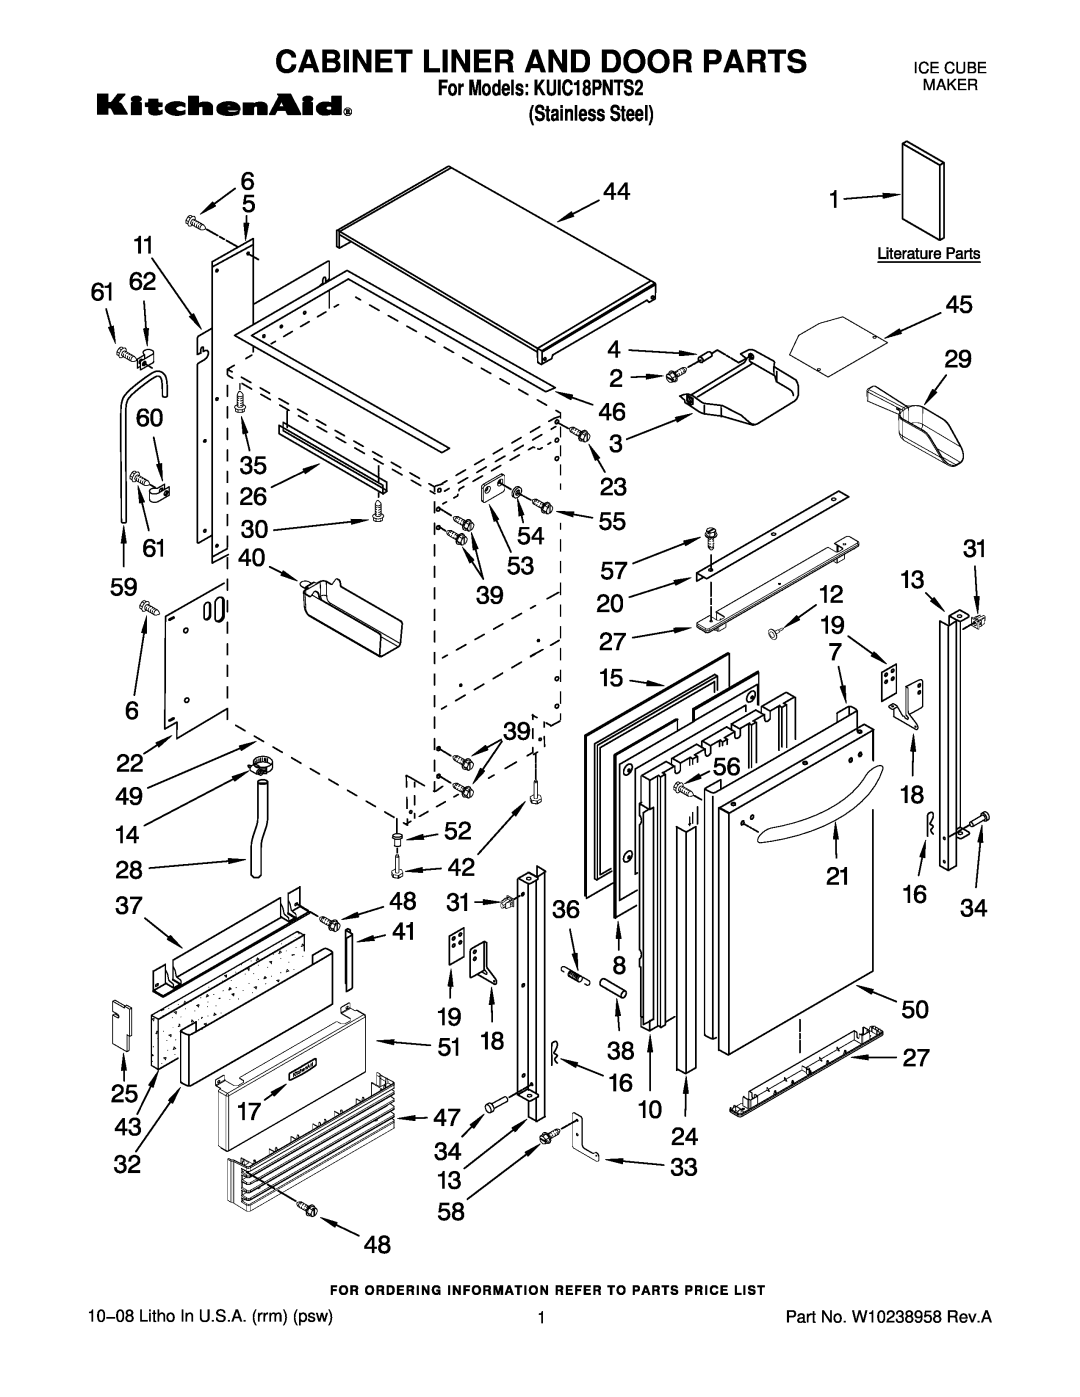 KitchenAid manual Cabinet Liner And Door Parts, For Models KUIC18PNTS2 Stainless Steel, Ice Cube Maker 